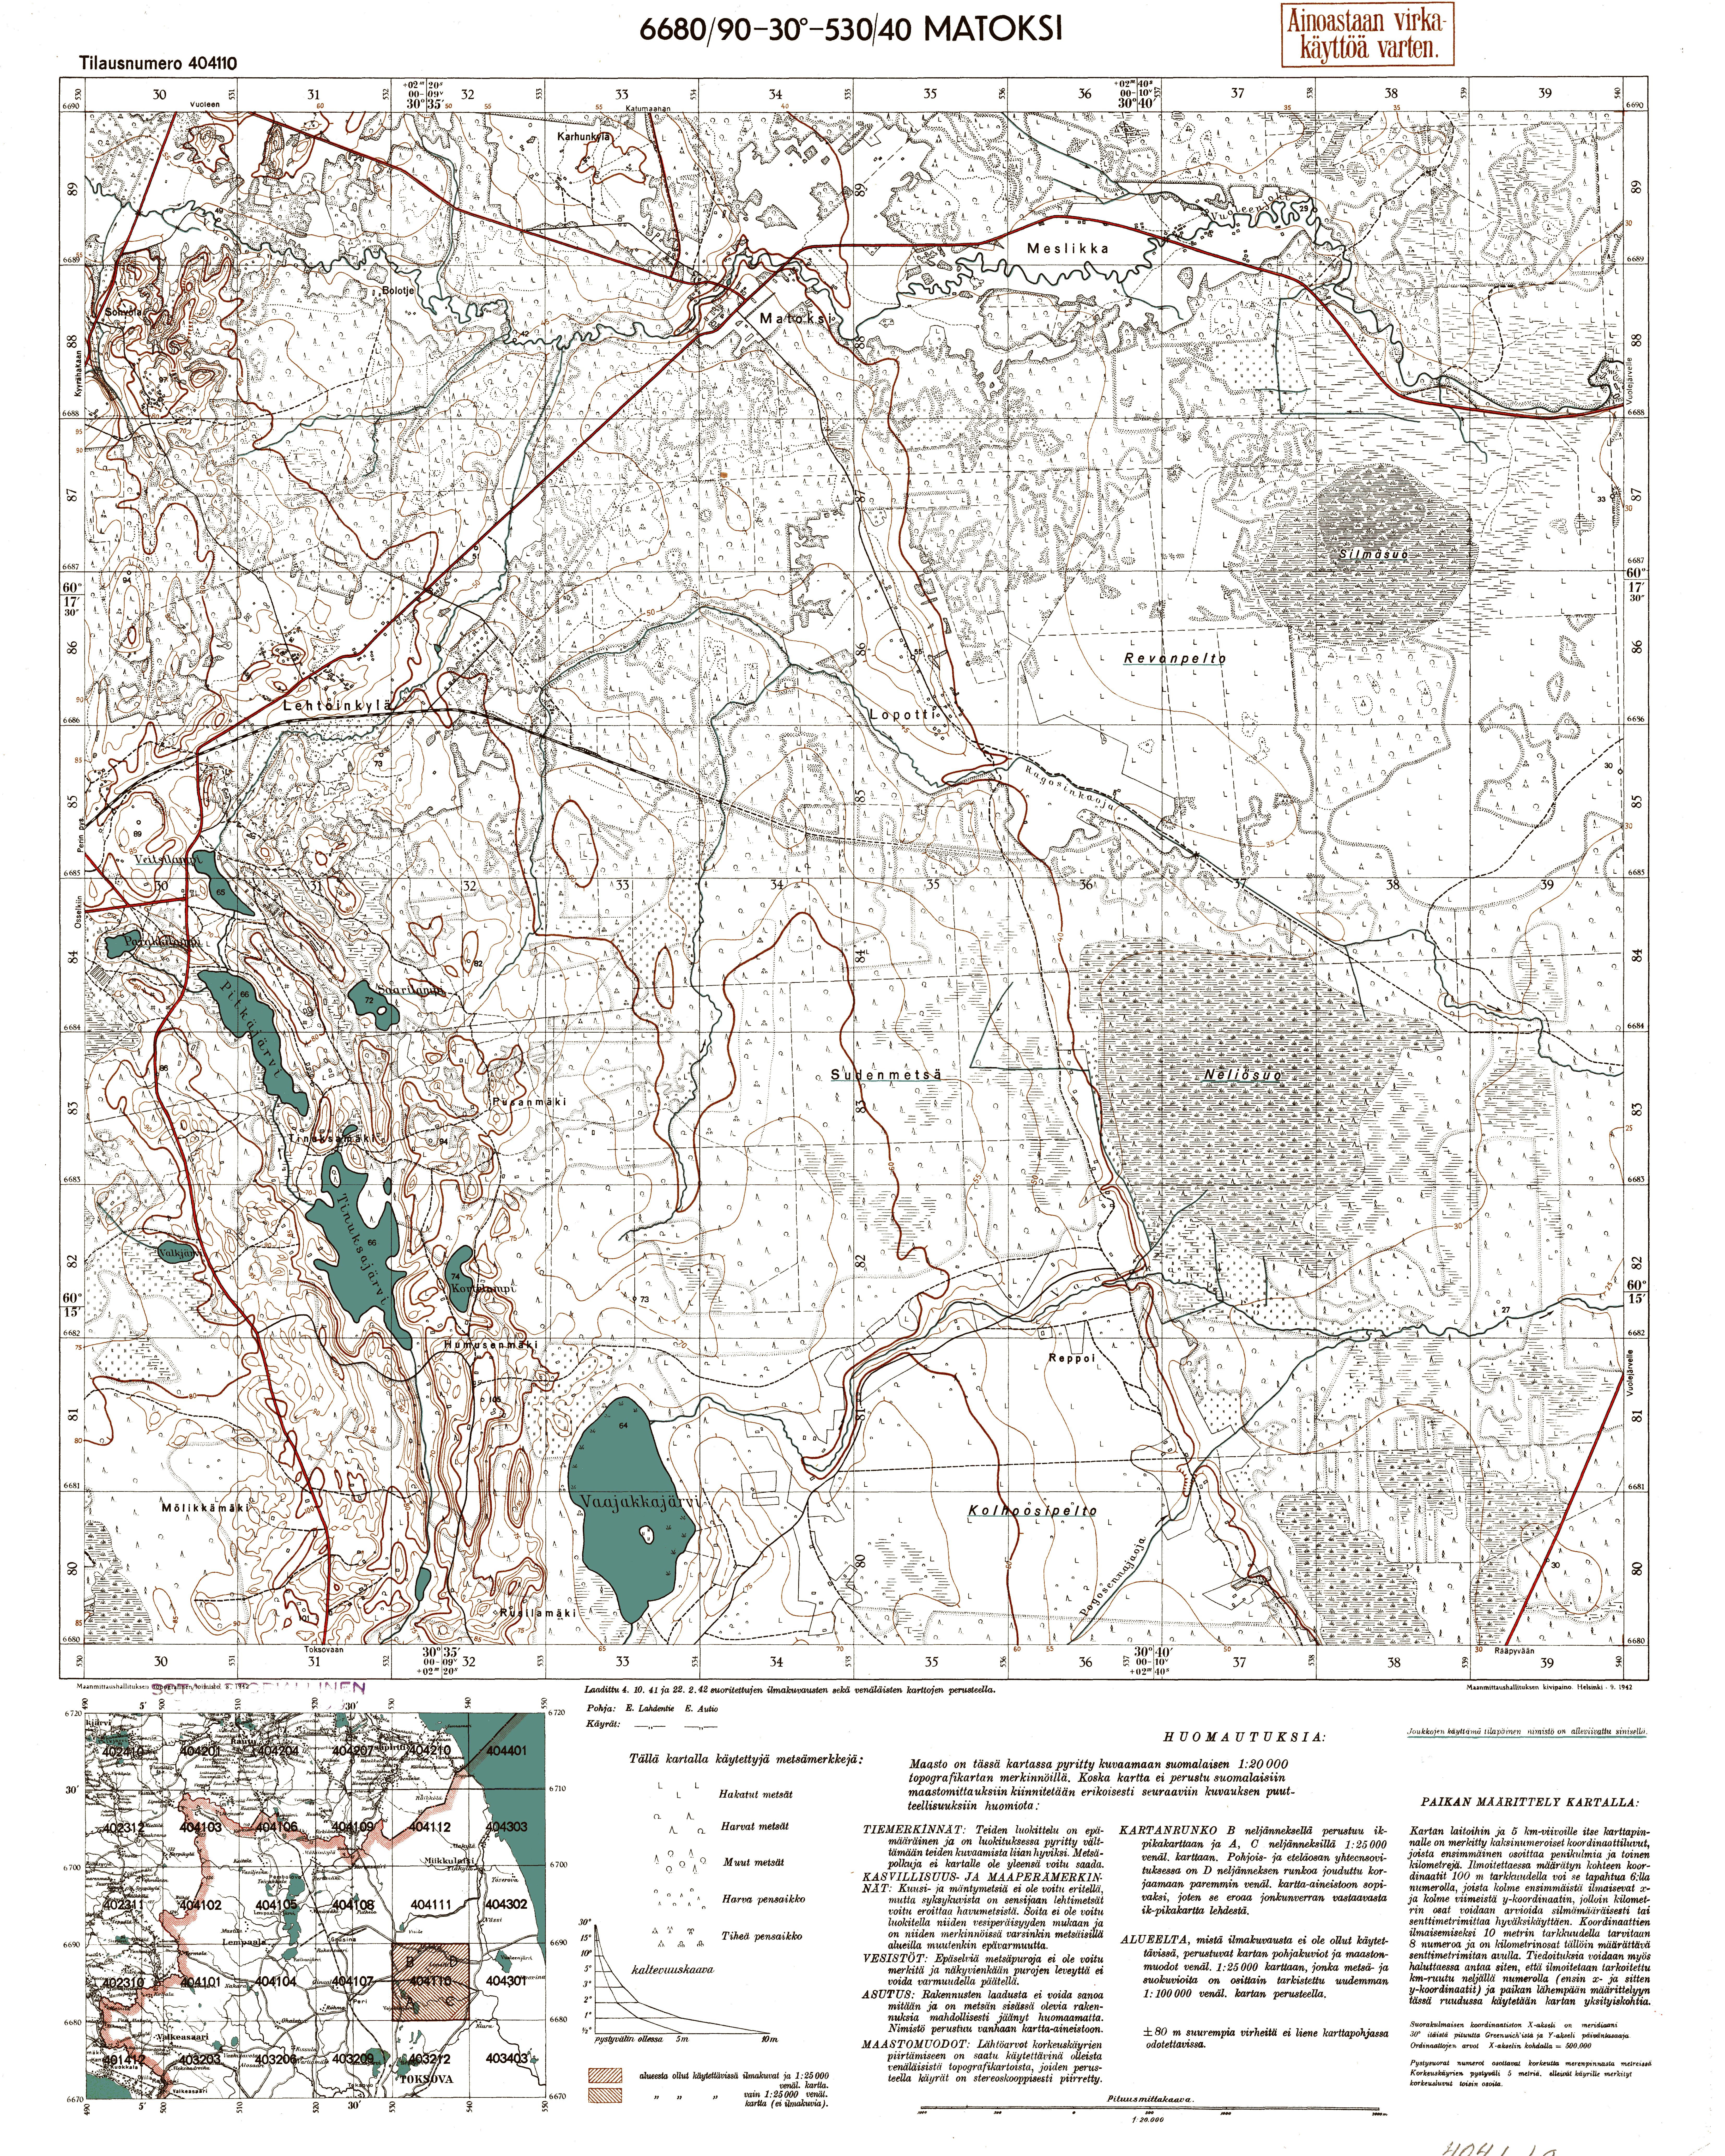 Matoksa. Matoksi. Topografikartta 404110. Topographic map from 1942. Use the zooming tool to explore in higher level of detail. Obtain as a quality print or high resolution image